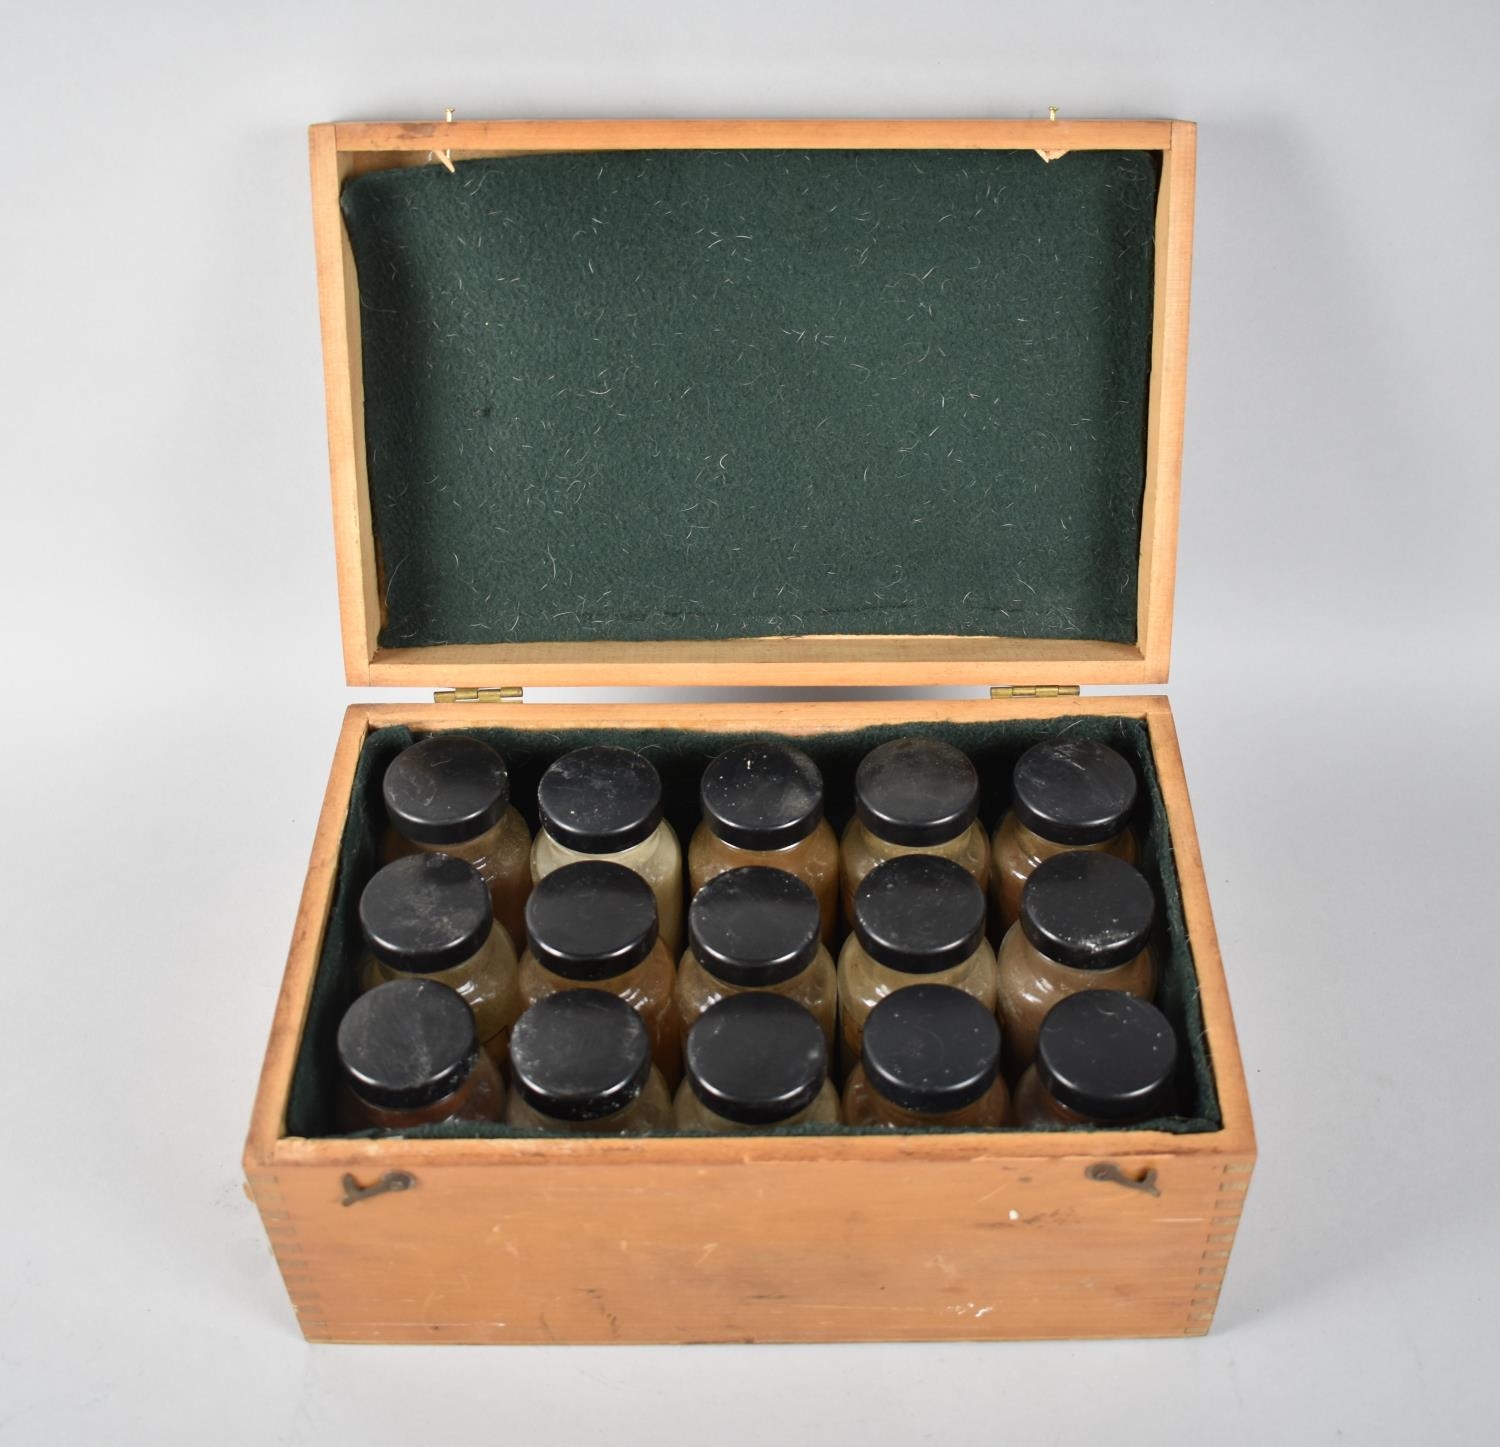 An Edwardian Pharmacognosy Box Containing Fifteen Labelled Jars to include Rhubarb, Cloves, Coffee - Image 2 of 3